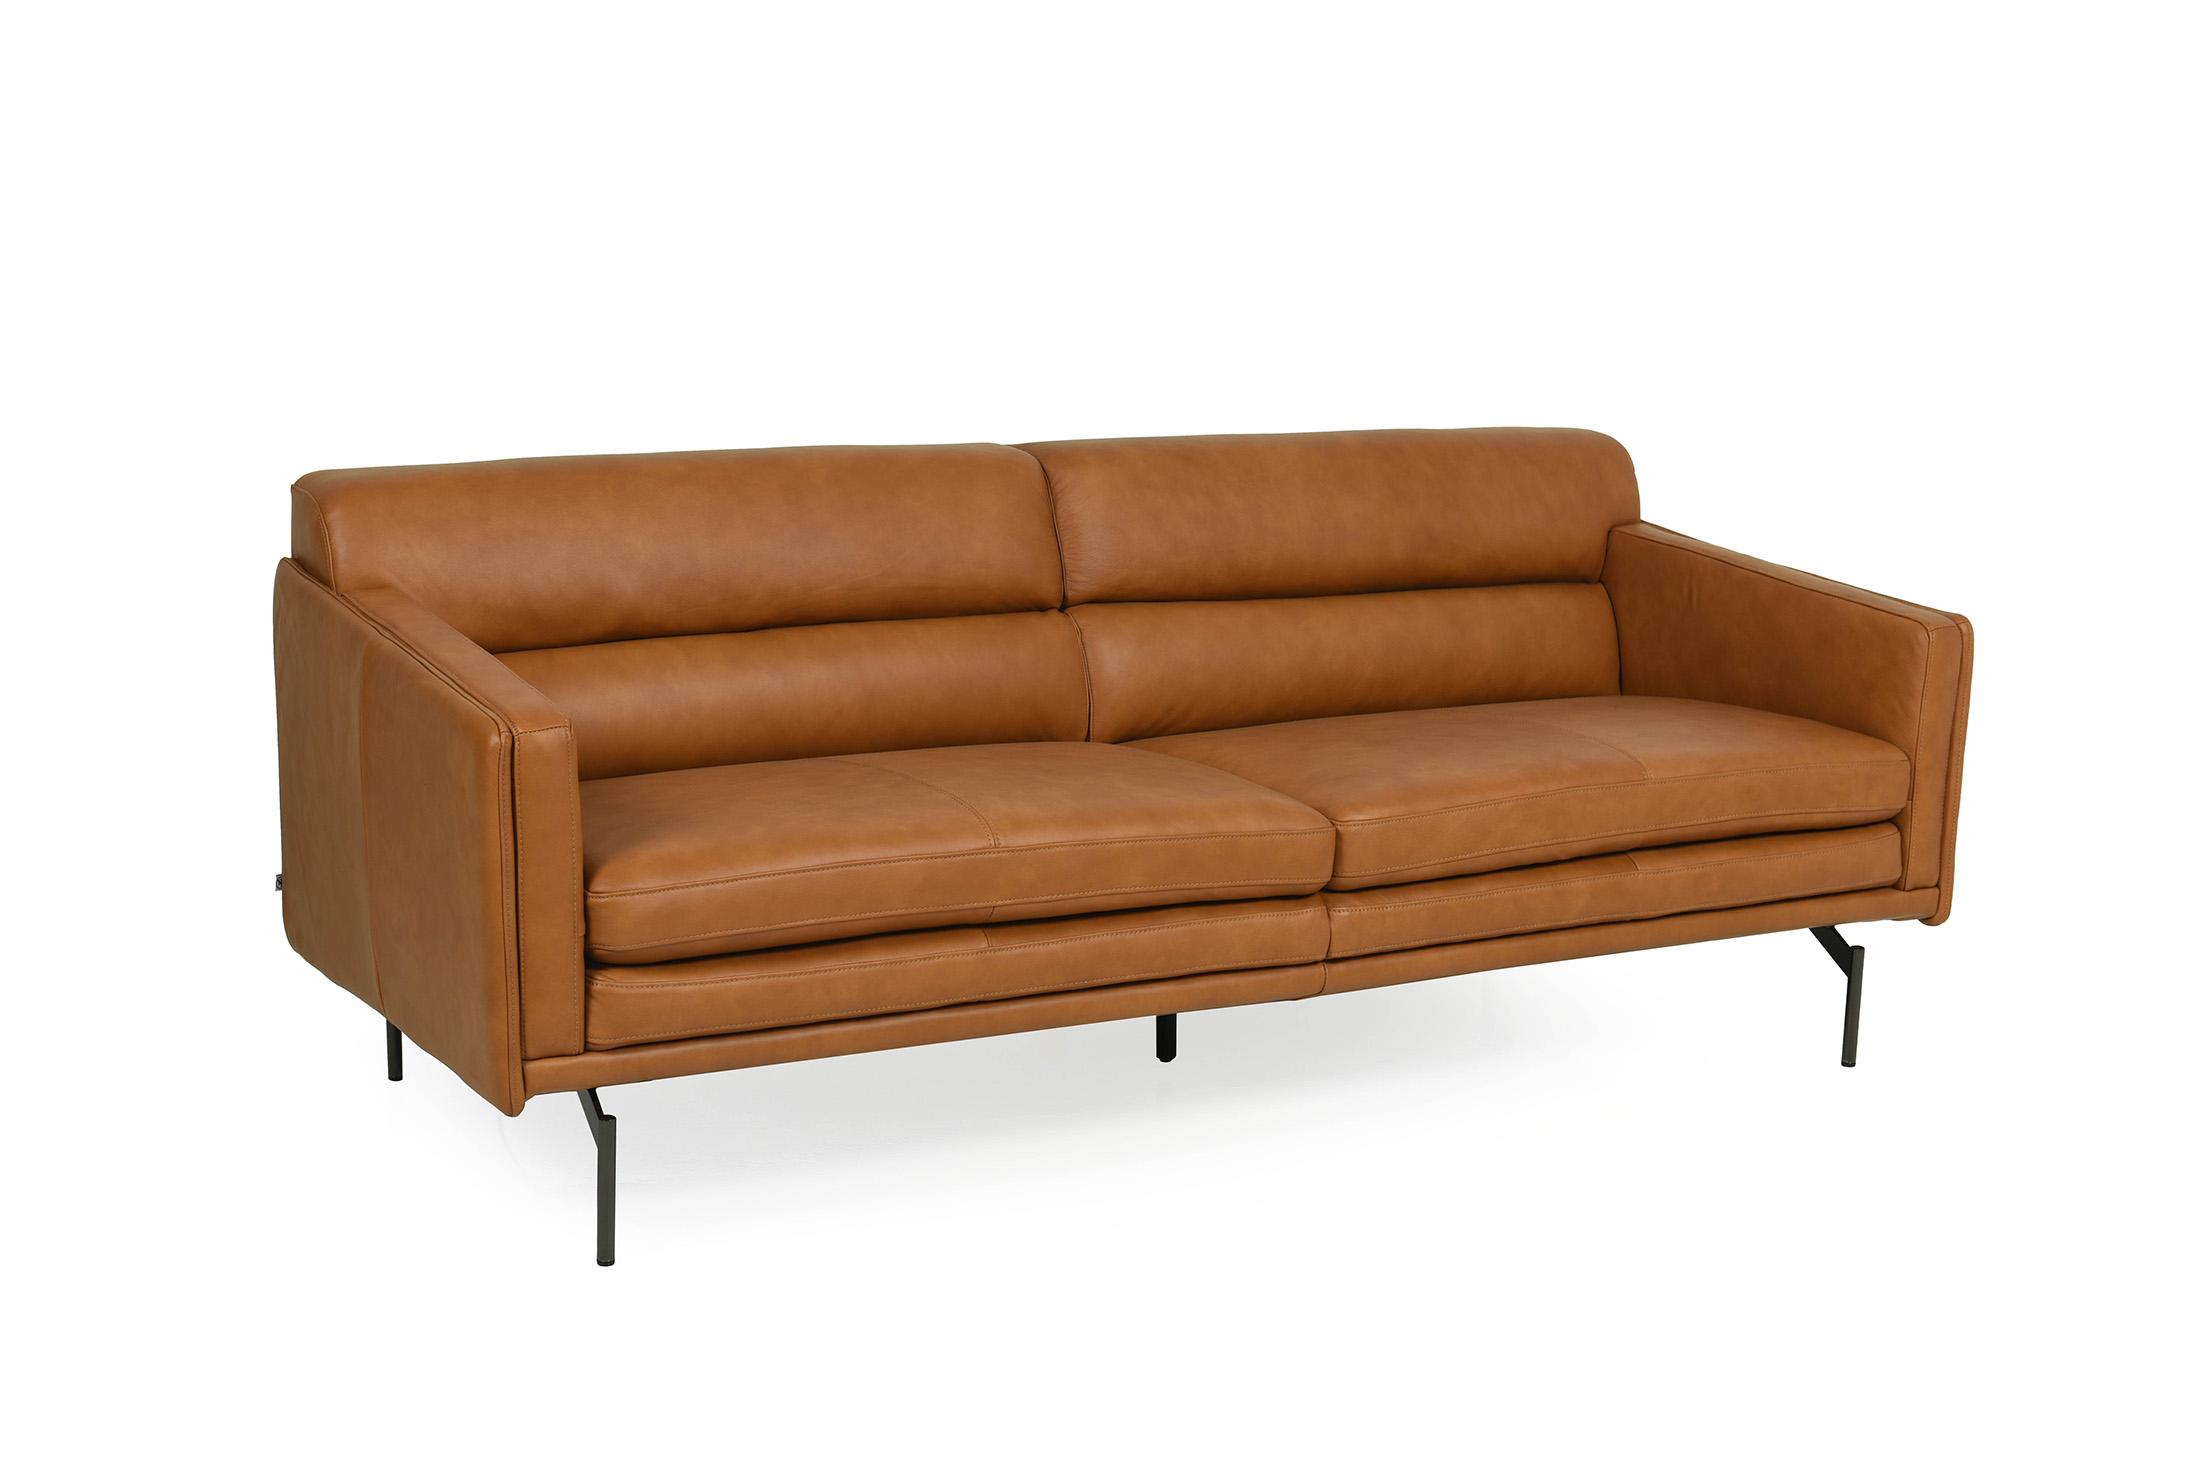 Contemporary, Modern Sofa 442 McCoy 44203BS1961 in Tan Full Leather